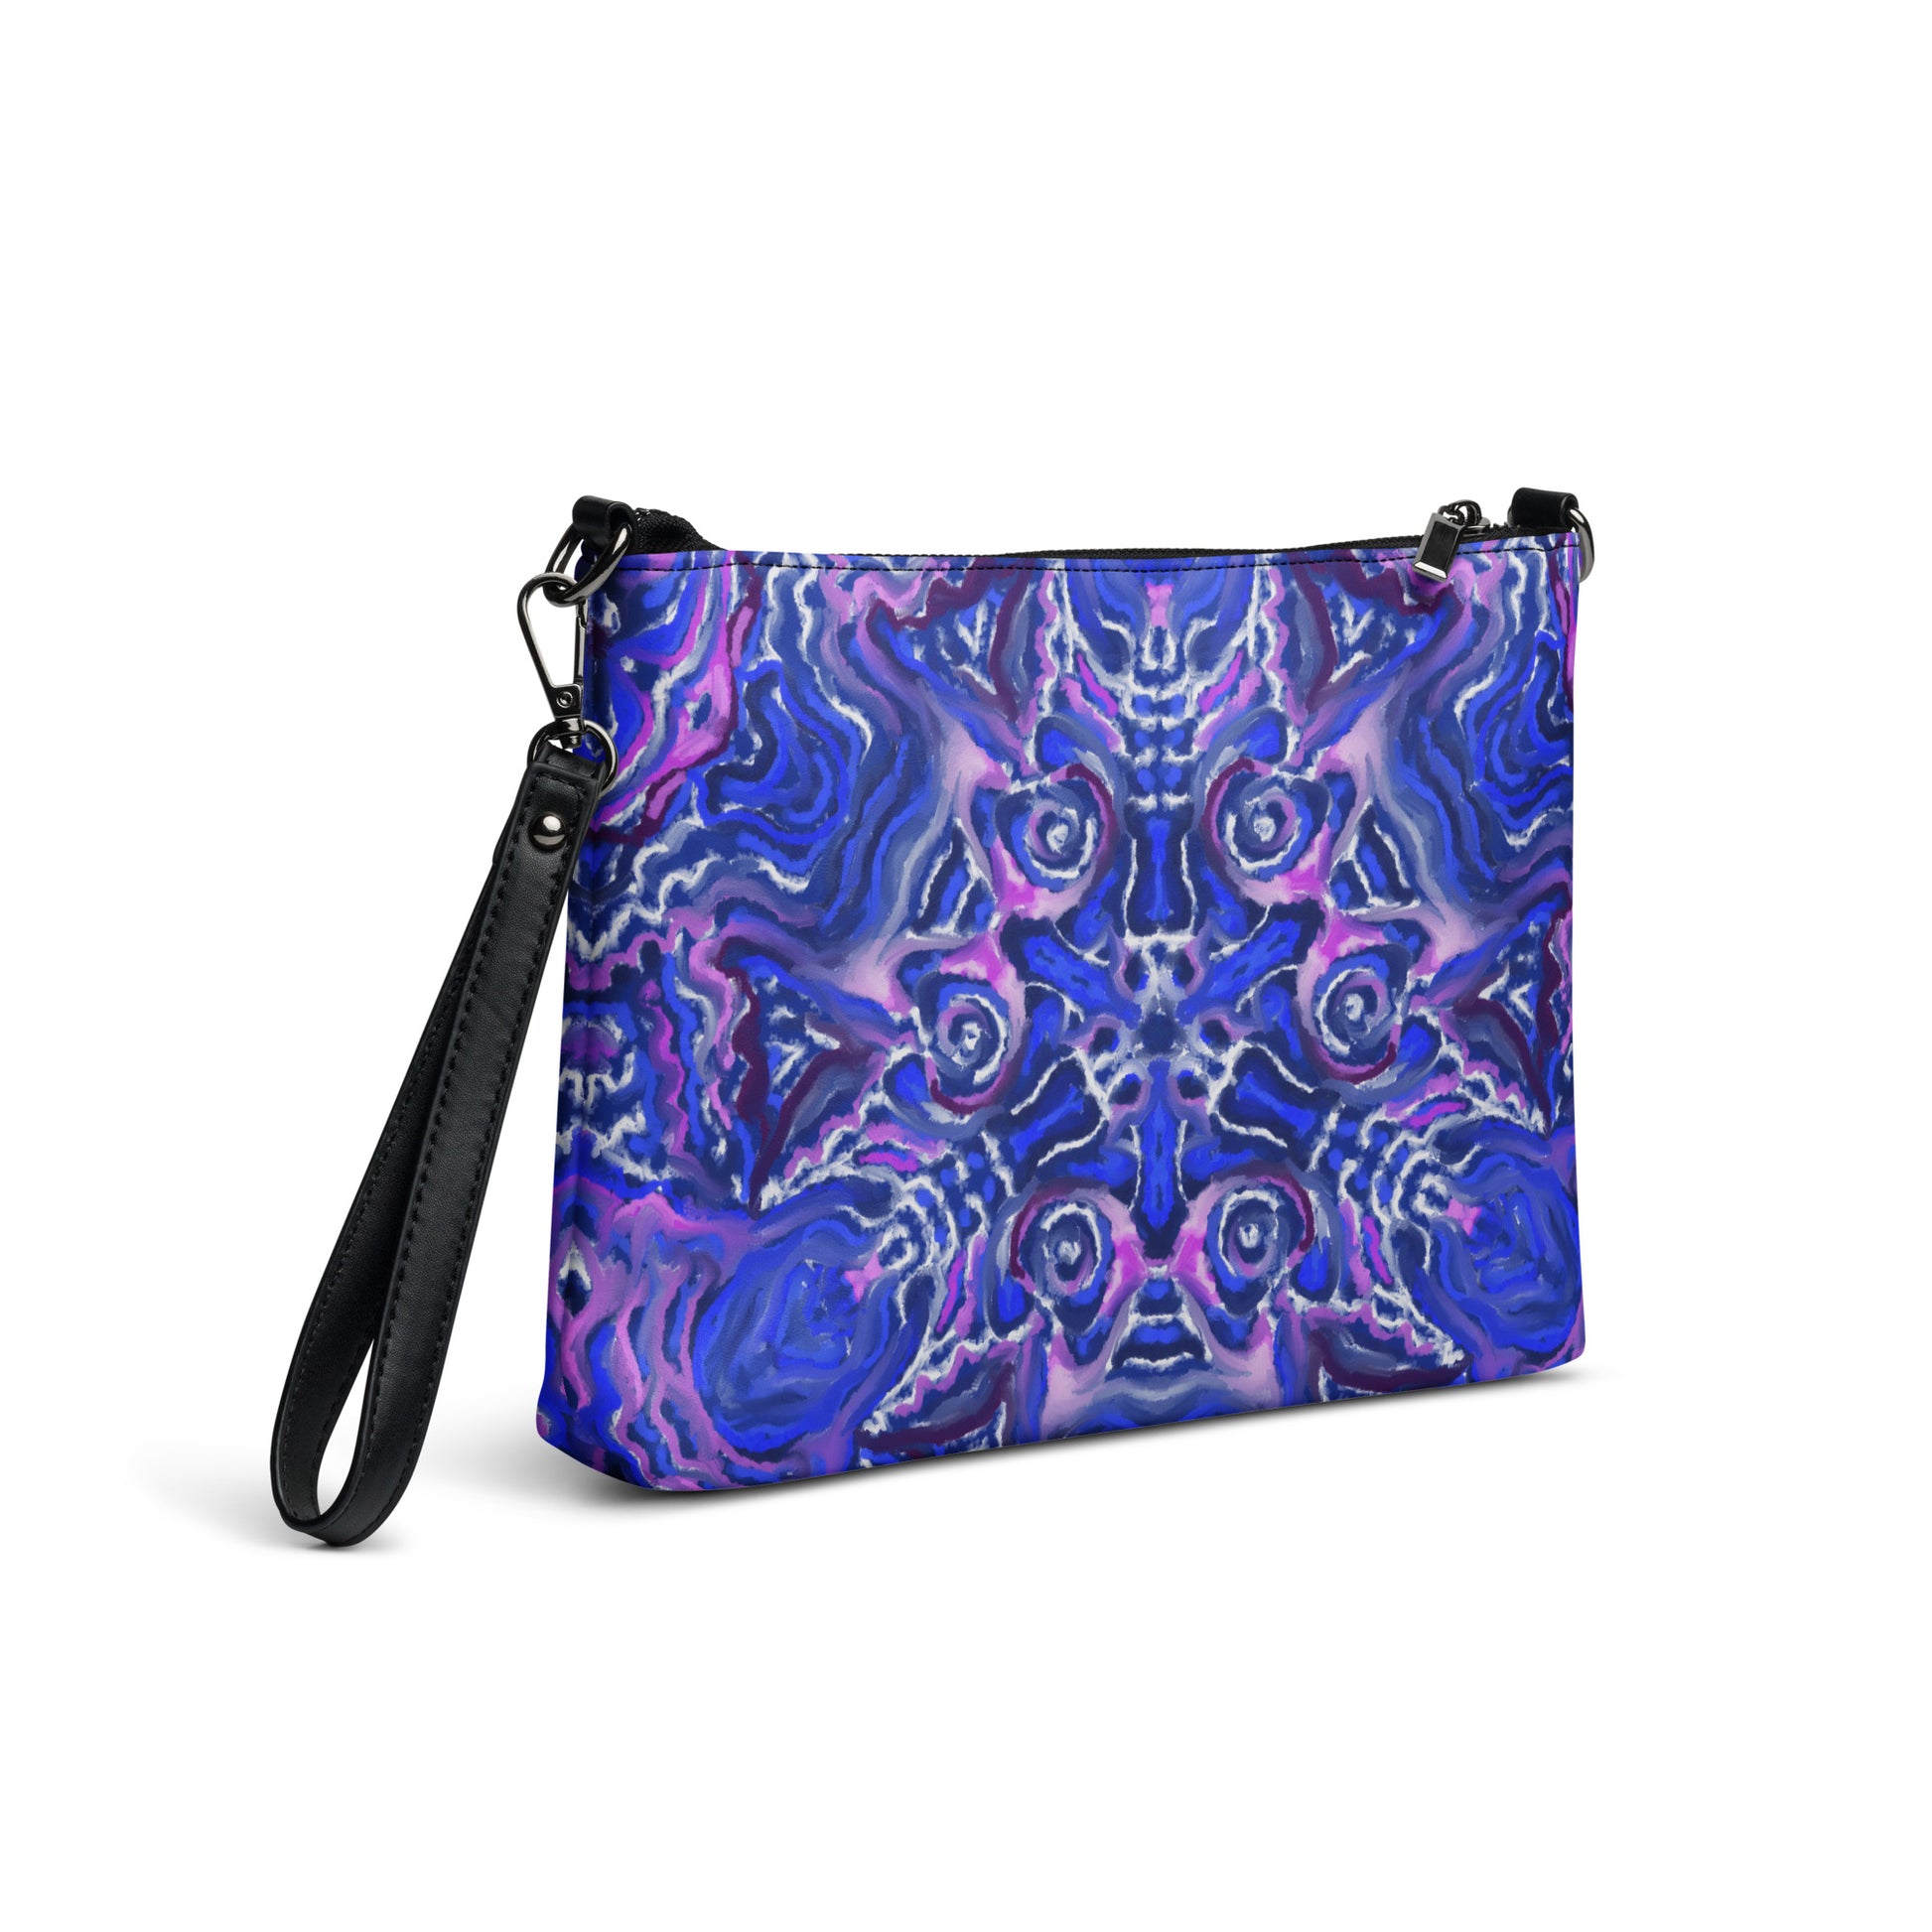 Blue and Purple Crossbody Bag by Emmy Spoon